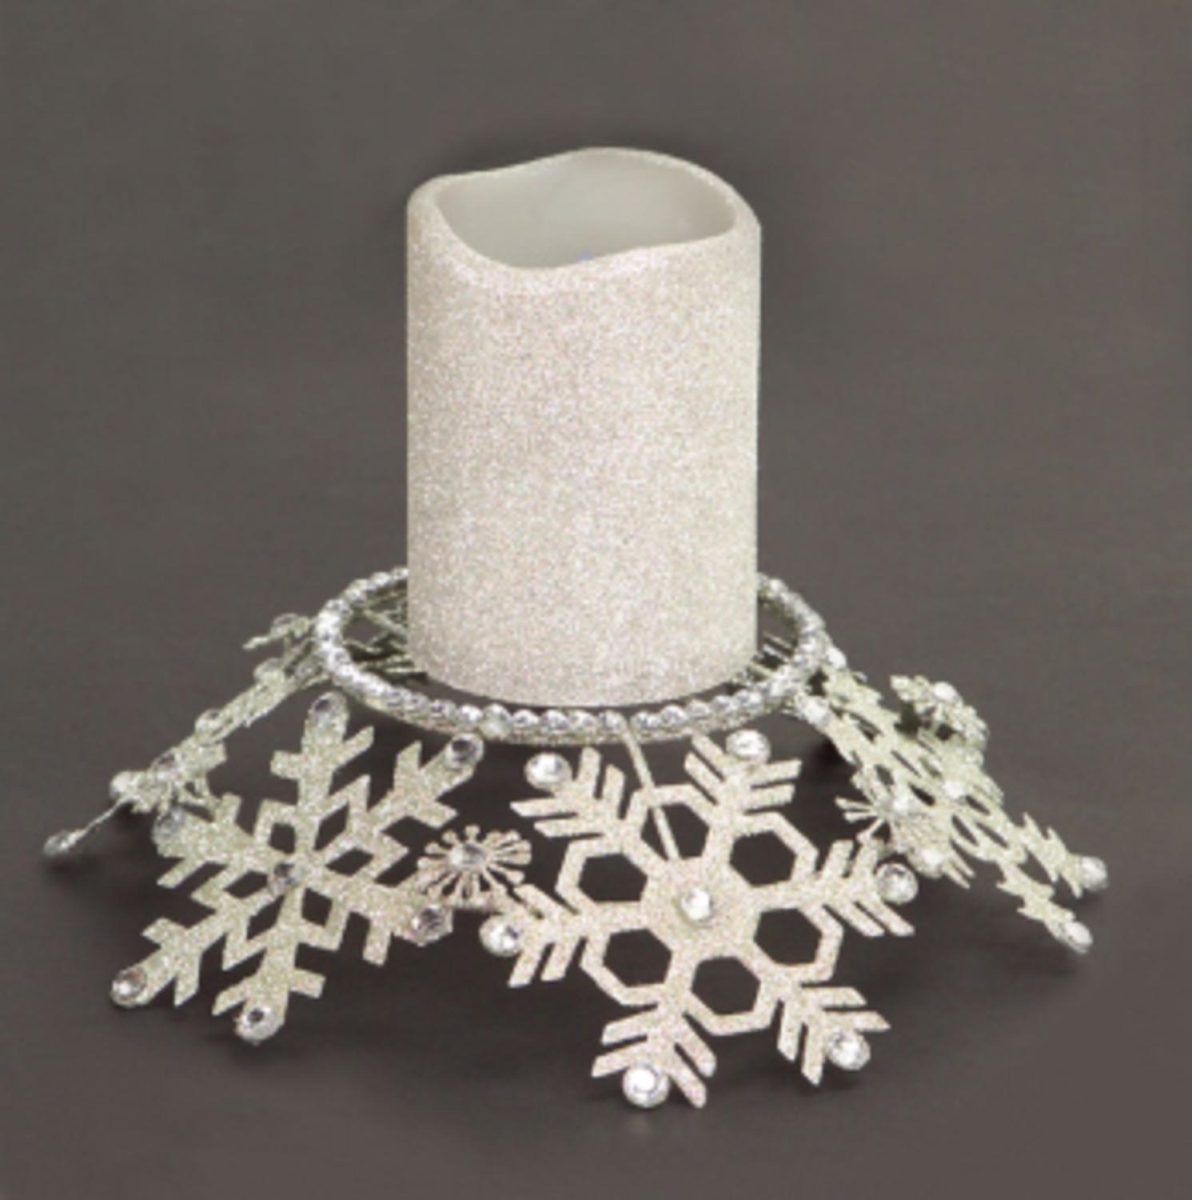 UPC 746427486415 product image for 30929818 9 in. Silver Snow Drift Snowflake Glittered & Jeweled Pillar Candle Hol | upcitemdb.com